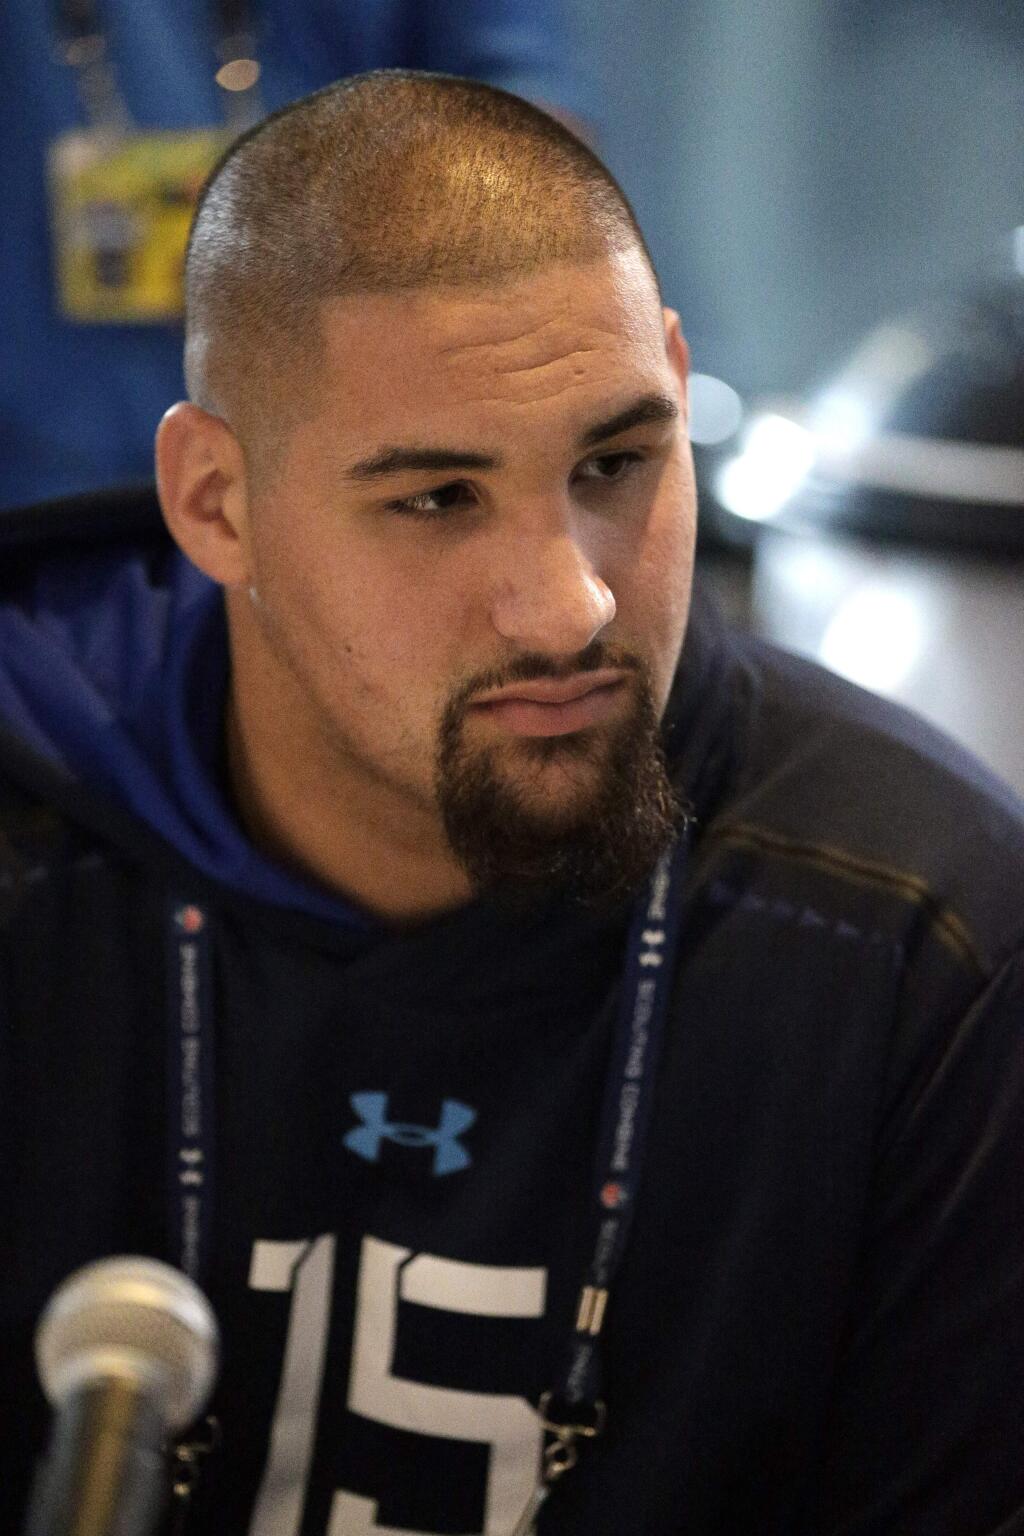 Miami offensive lineman Jon Feliciano answers a question during a news conference at the NFL football scouting combine in Indianapolis, Thursday, Feb. 19, 2015. (AP Photo/David J. Phillip)